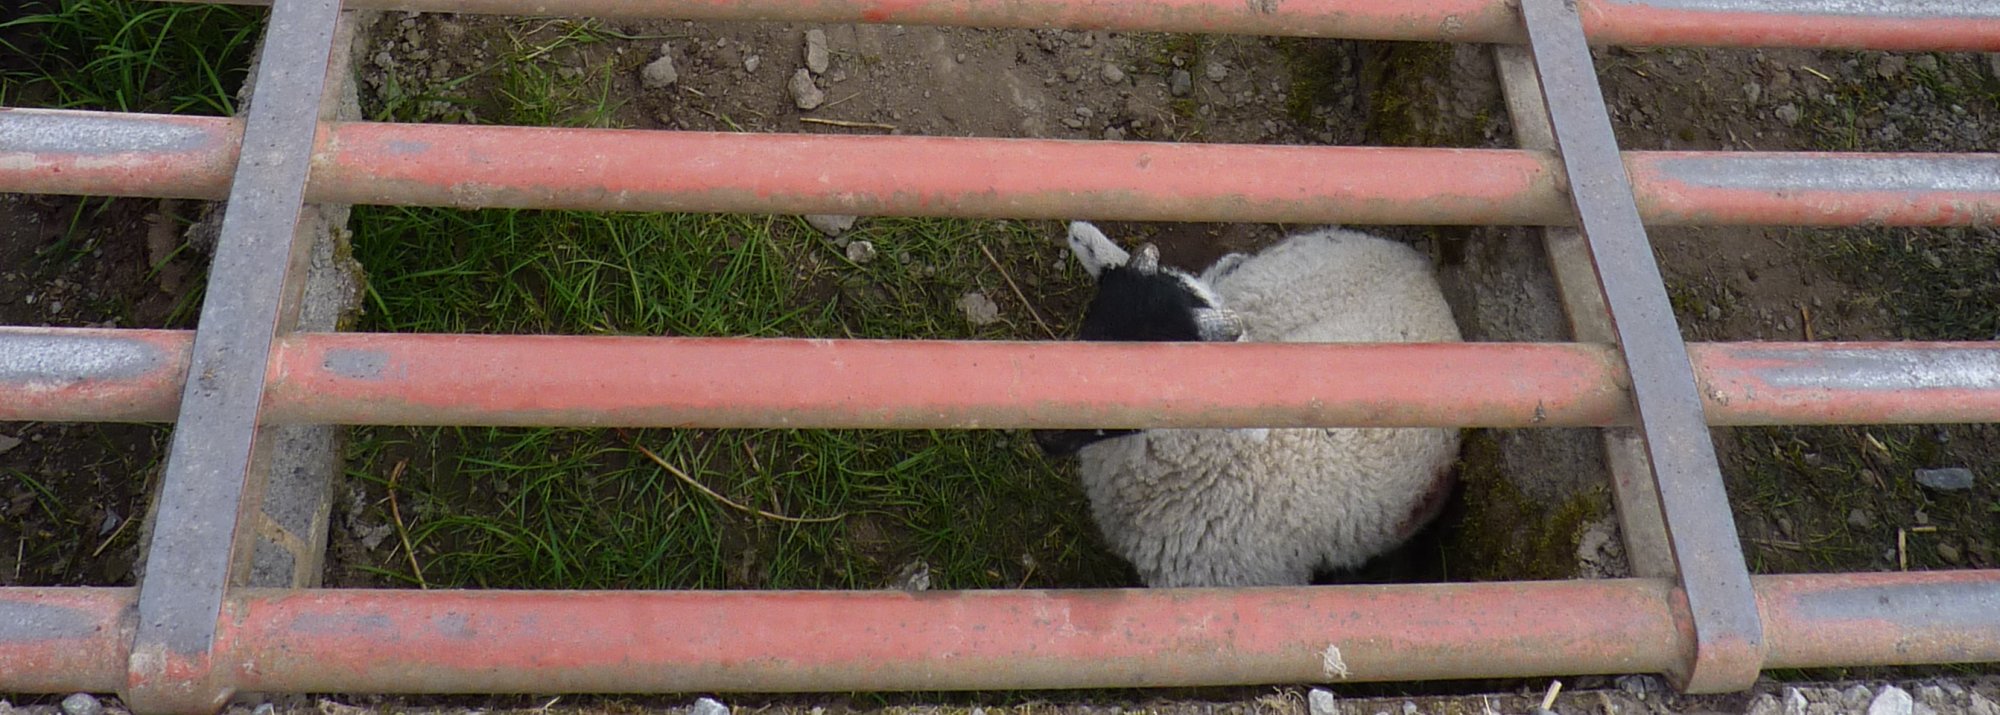 Lamb trapped in the cattle grid... again!